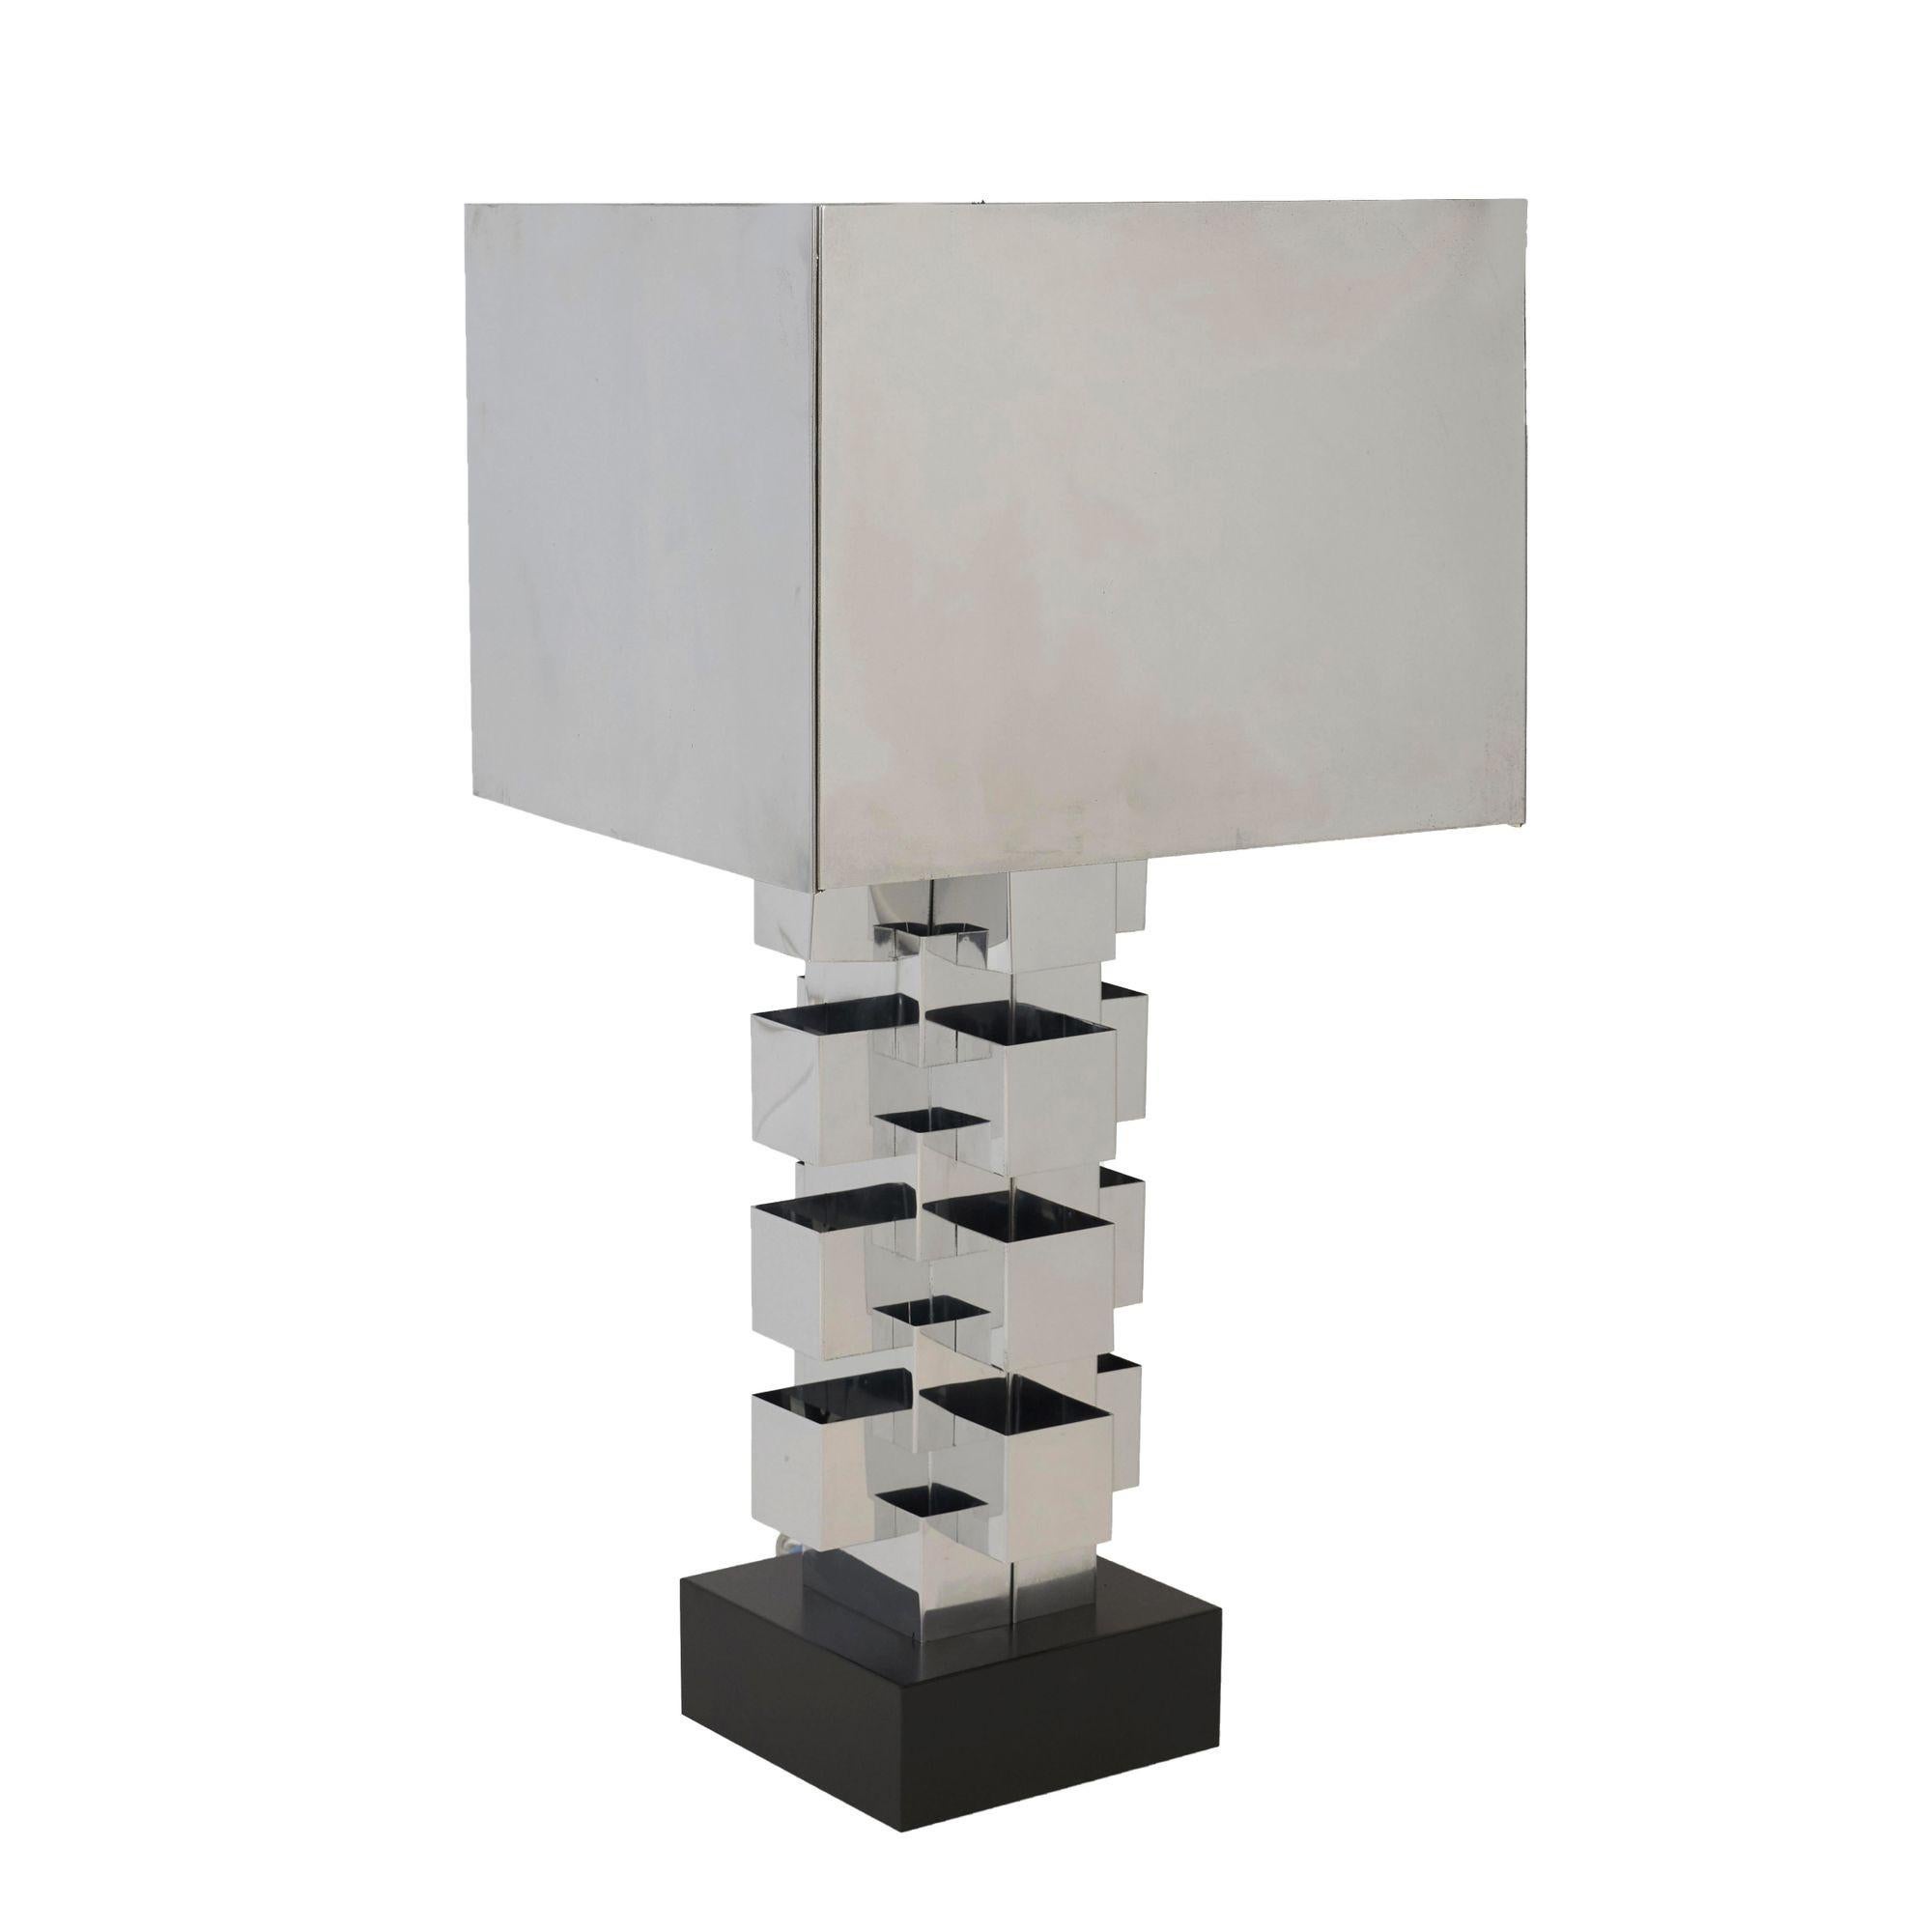 Polished chrome structural Table lamp with square central column composed of interlocking bands resting on a black lacquered base.

Designed By Curtis Jere for Artisan House, American circa 1970.